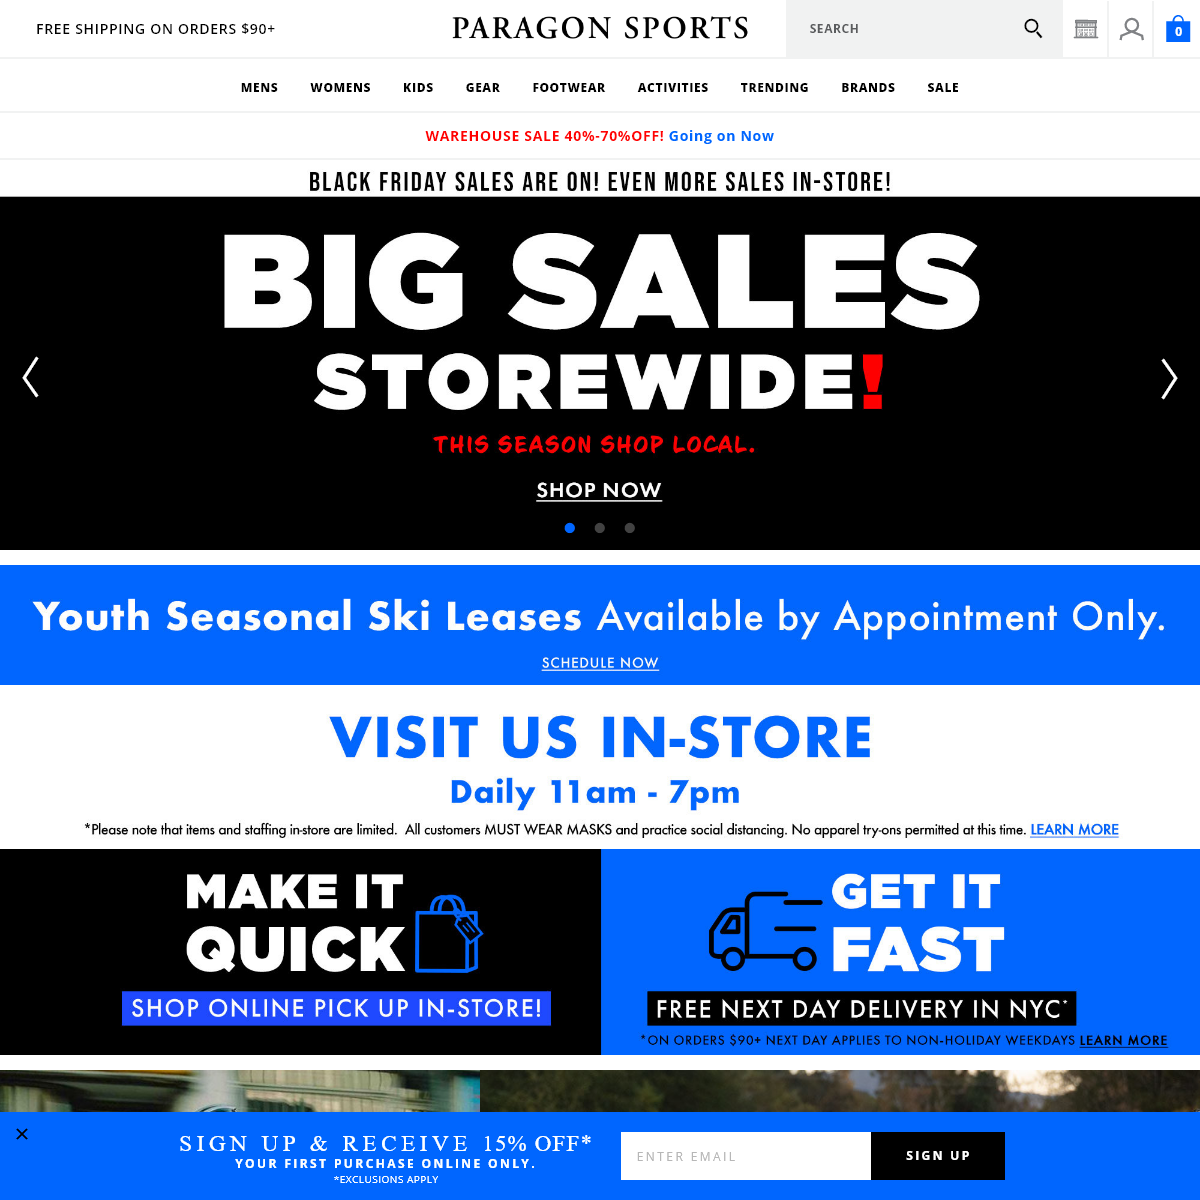 A complete backup of paragonsports.com